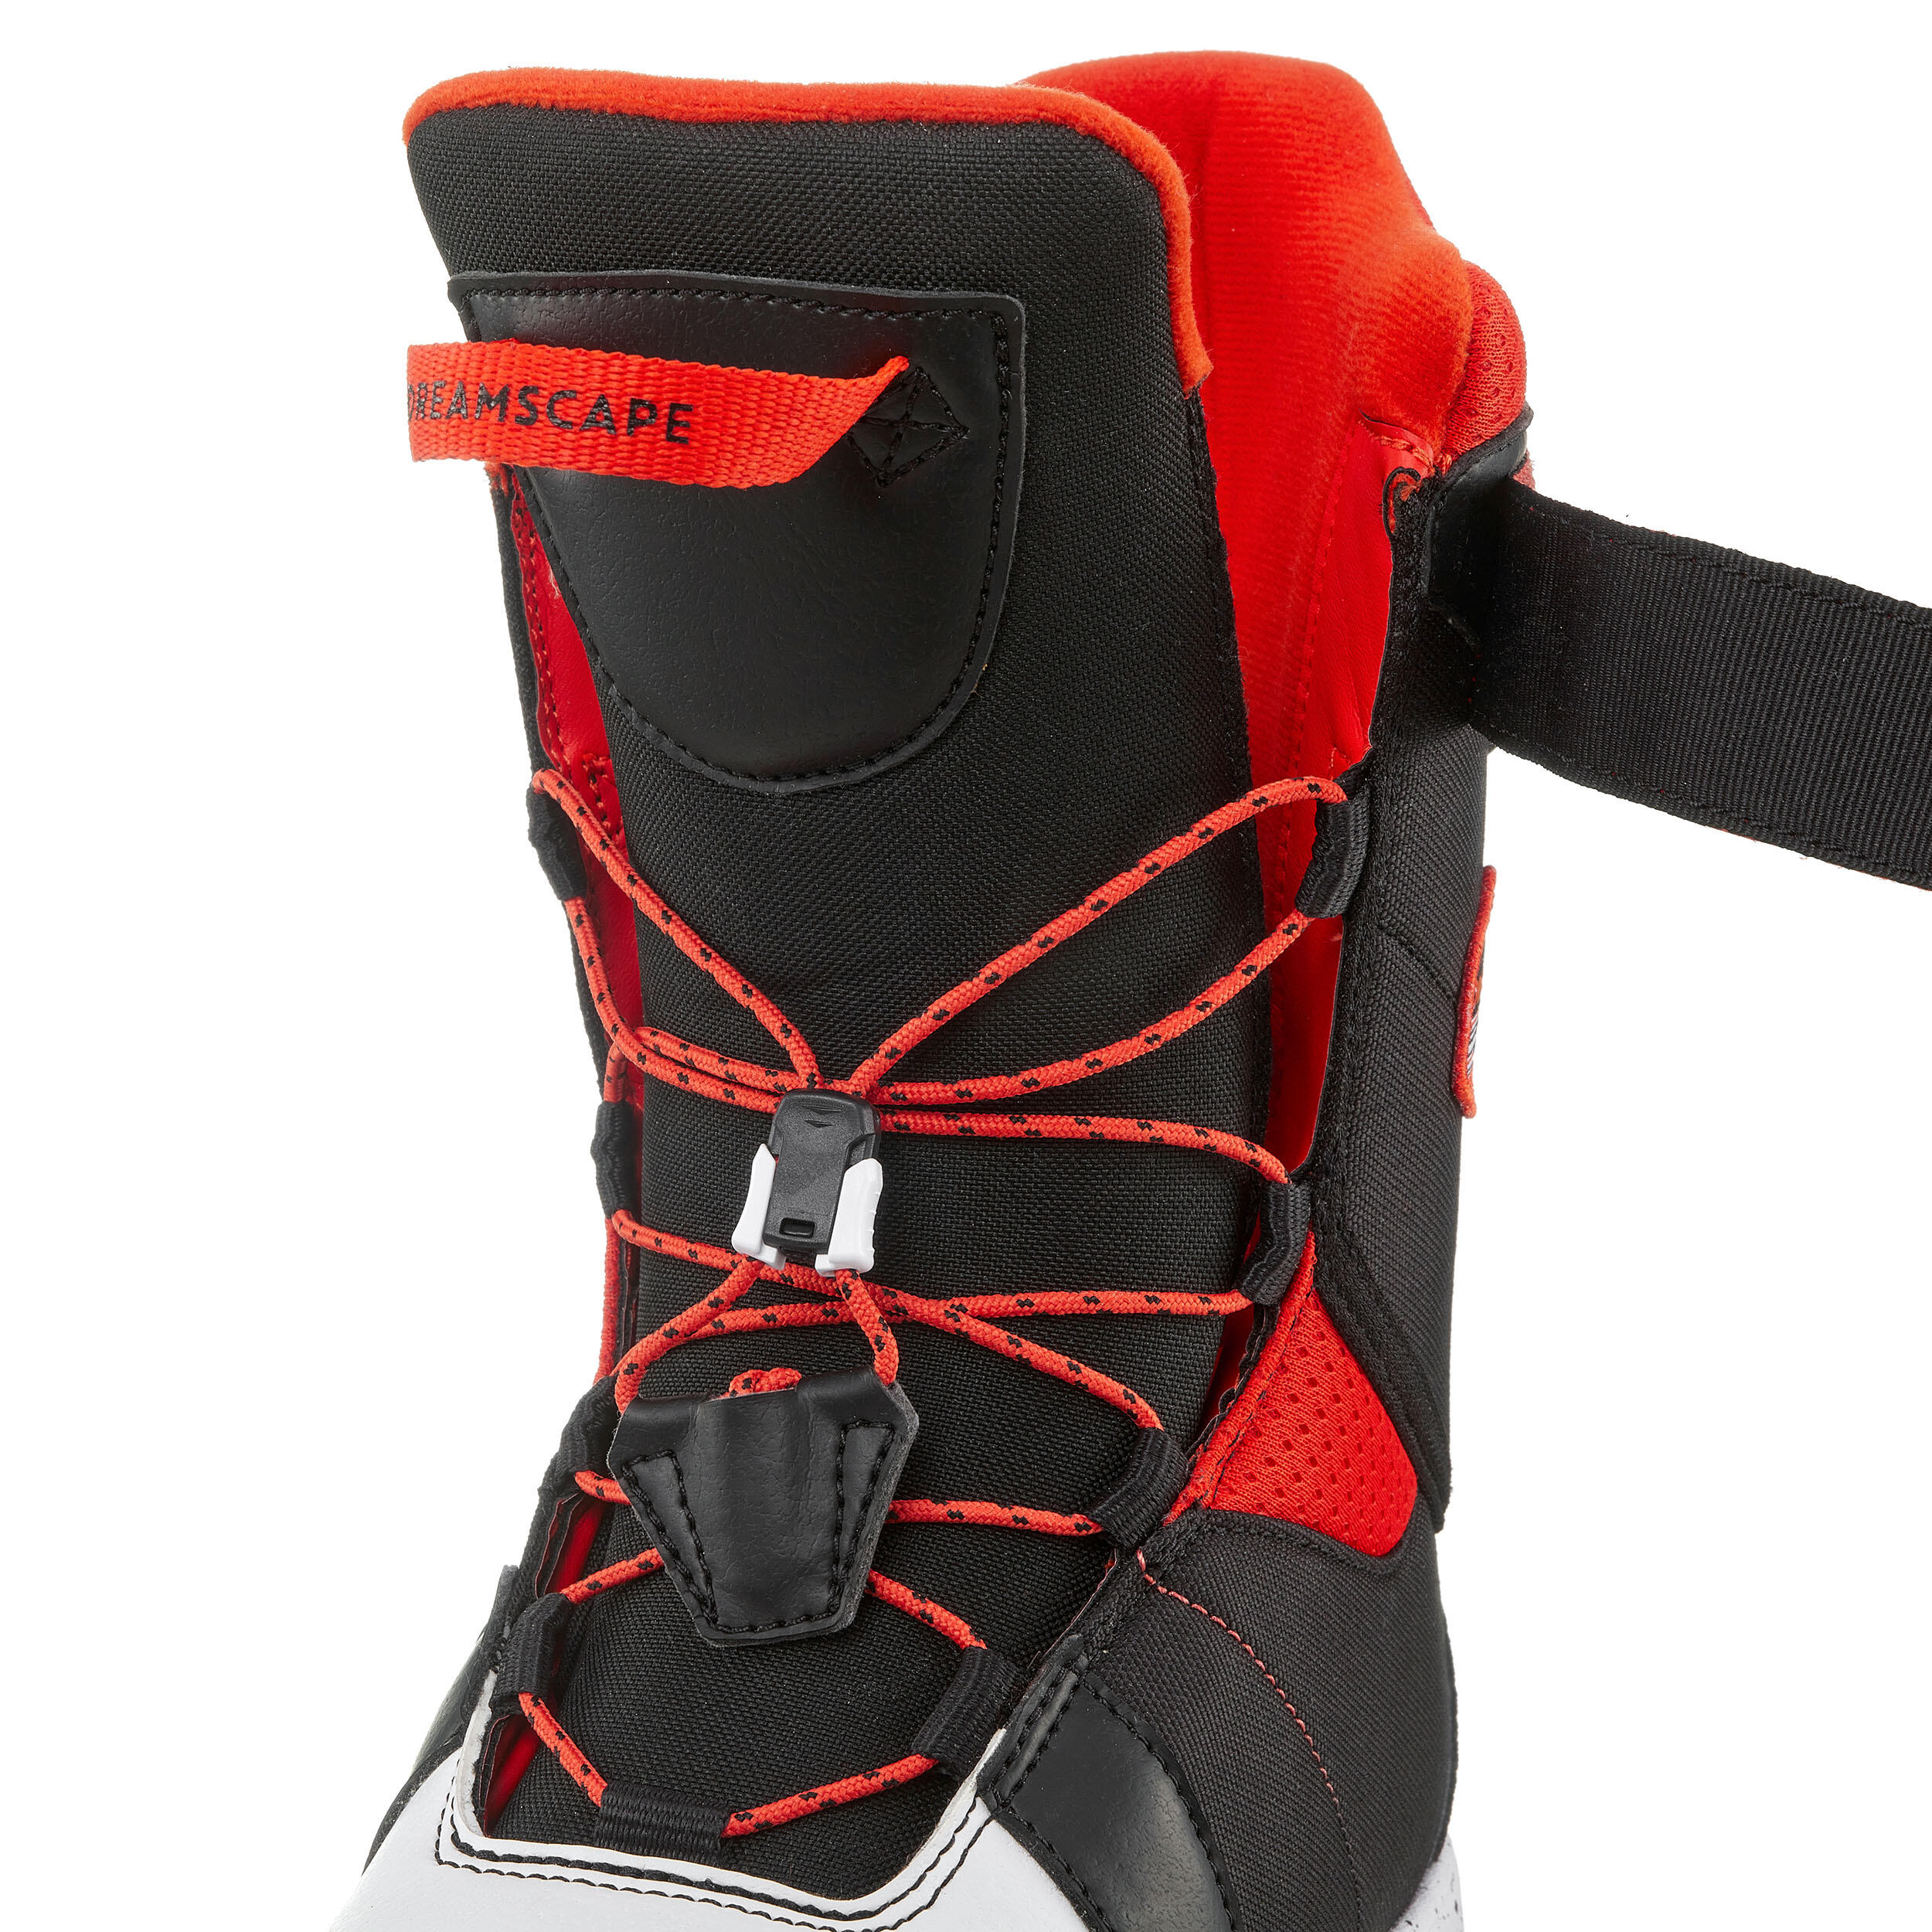 Kids’ Quick Fastening Snowboard Boots - Indy 100 - S 8/9